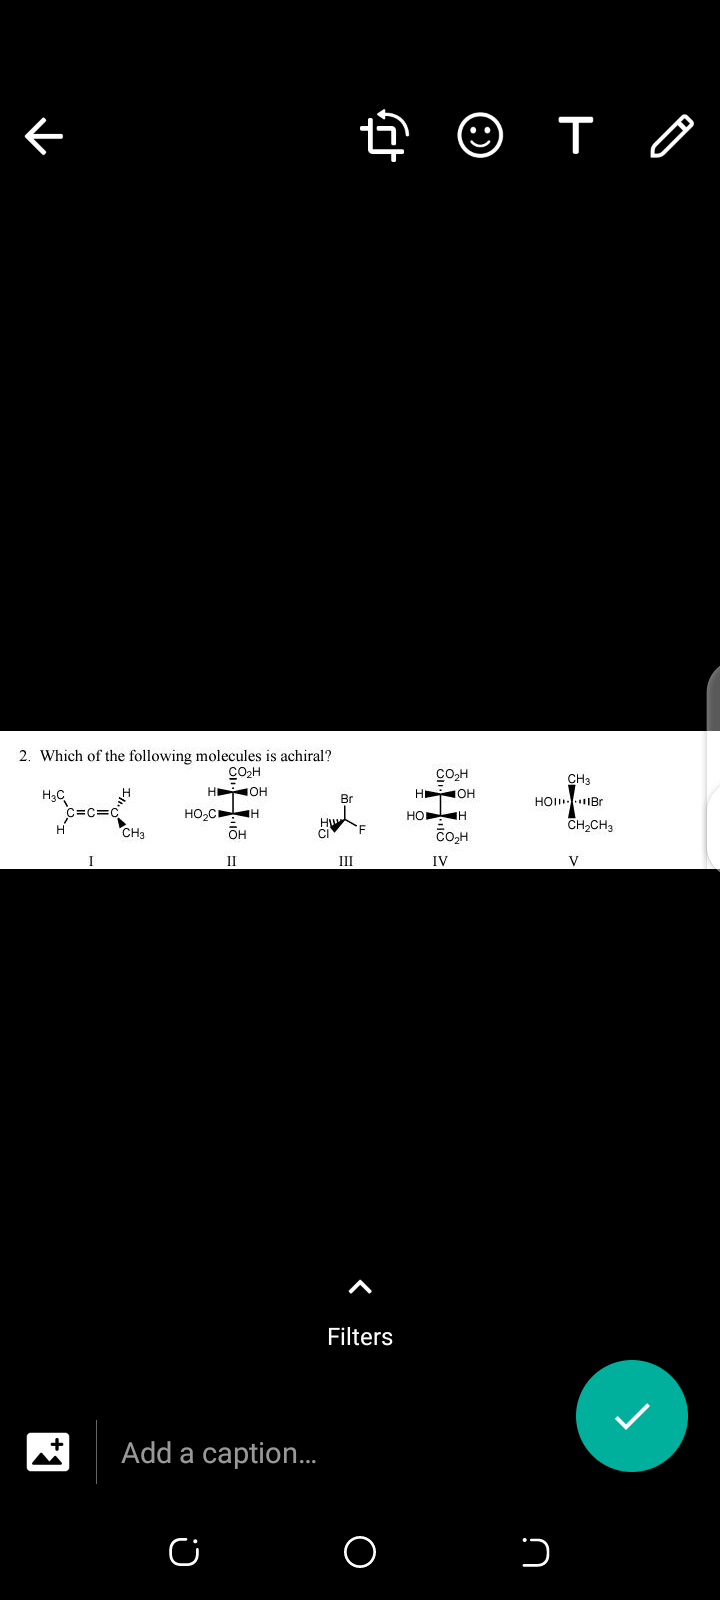 2. Which of the following molecules is achiral?
COH
Co,H
CH3
H3C
H OH
H OH
HOI IBr
Br
HO,CH
HO H
CH,CH3
CH3
CO,H
II
II
IV
V
Filters
Add a caption.
